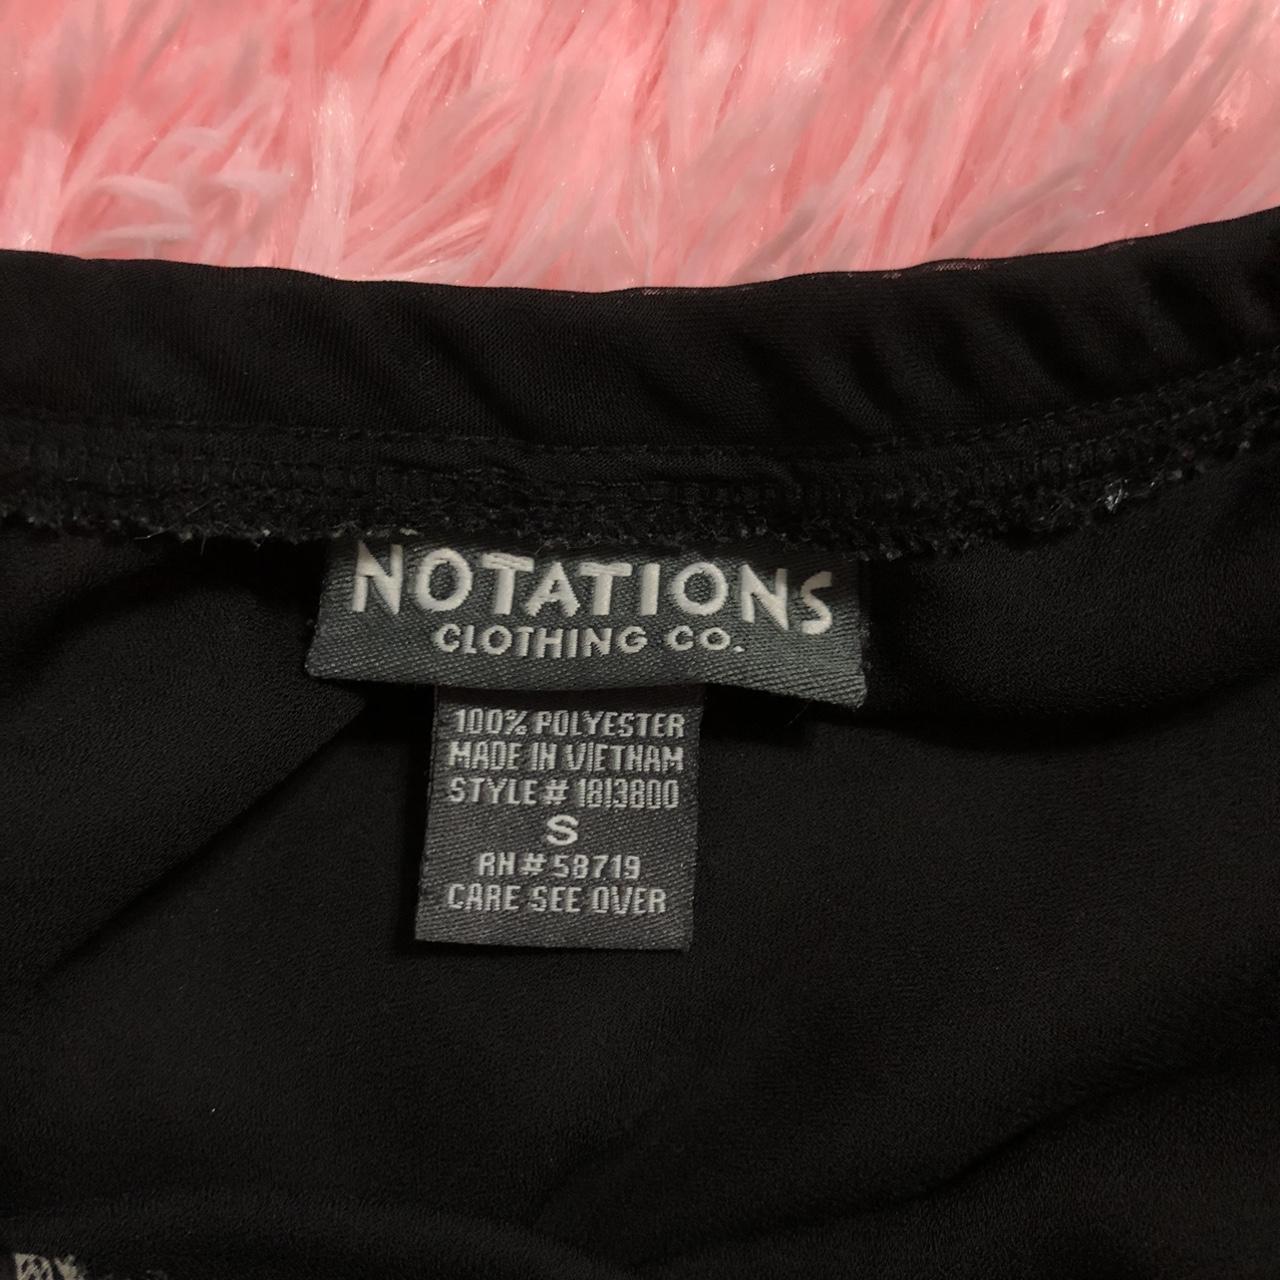 Notations Women's Black and Grey Skirt (3)